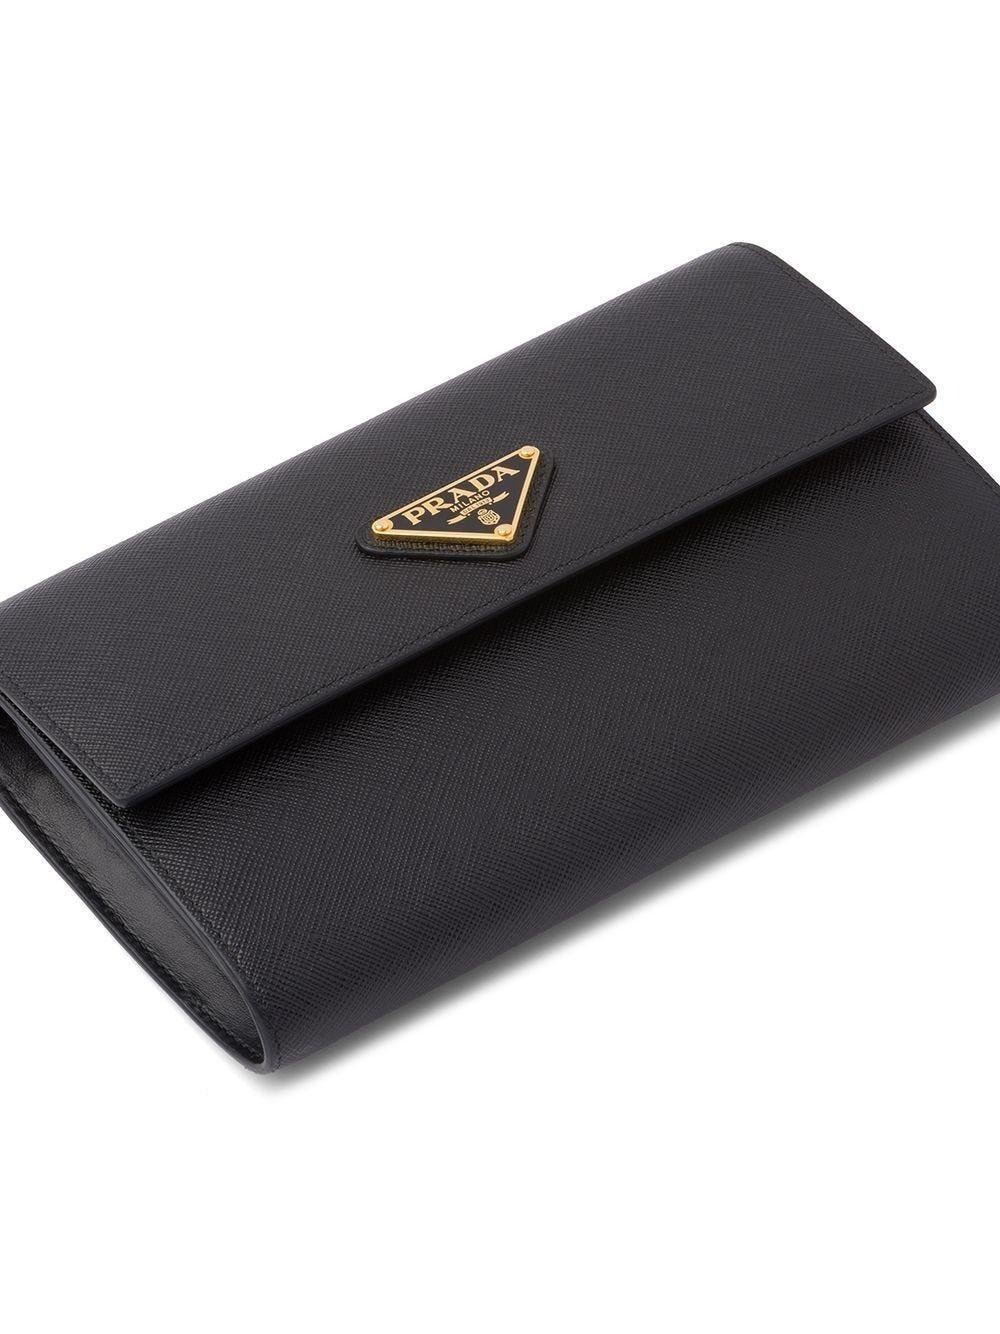 Prada Saffiano Leather Wallet With Shoulder Strap in Black | Lyst